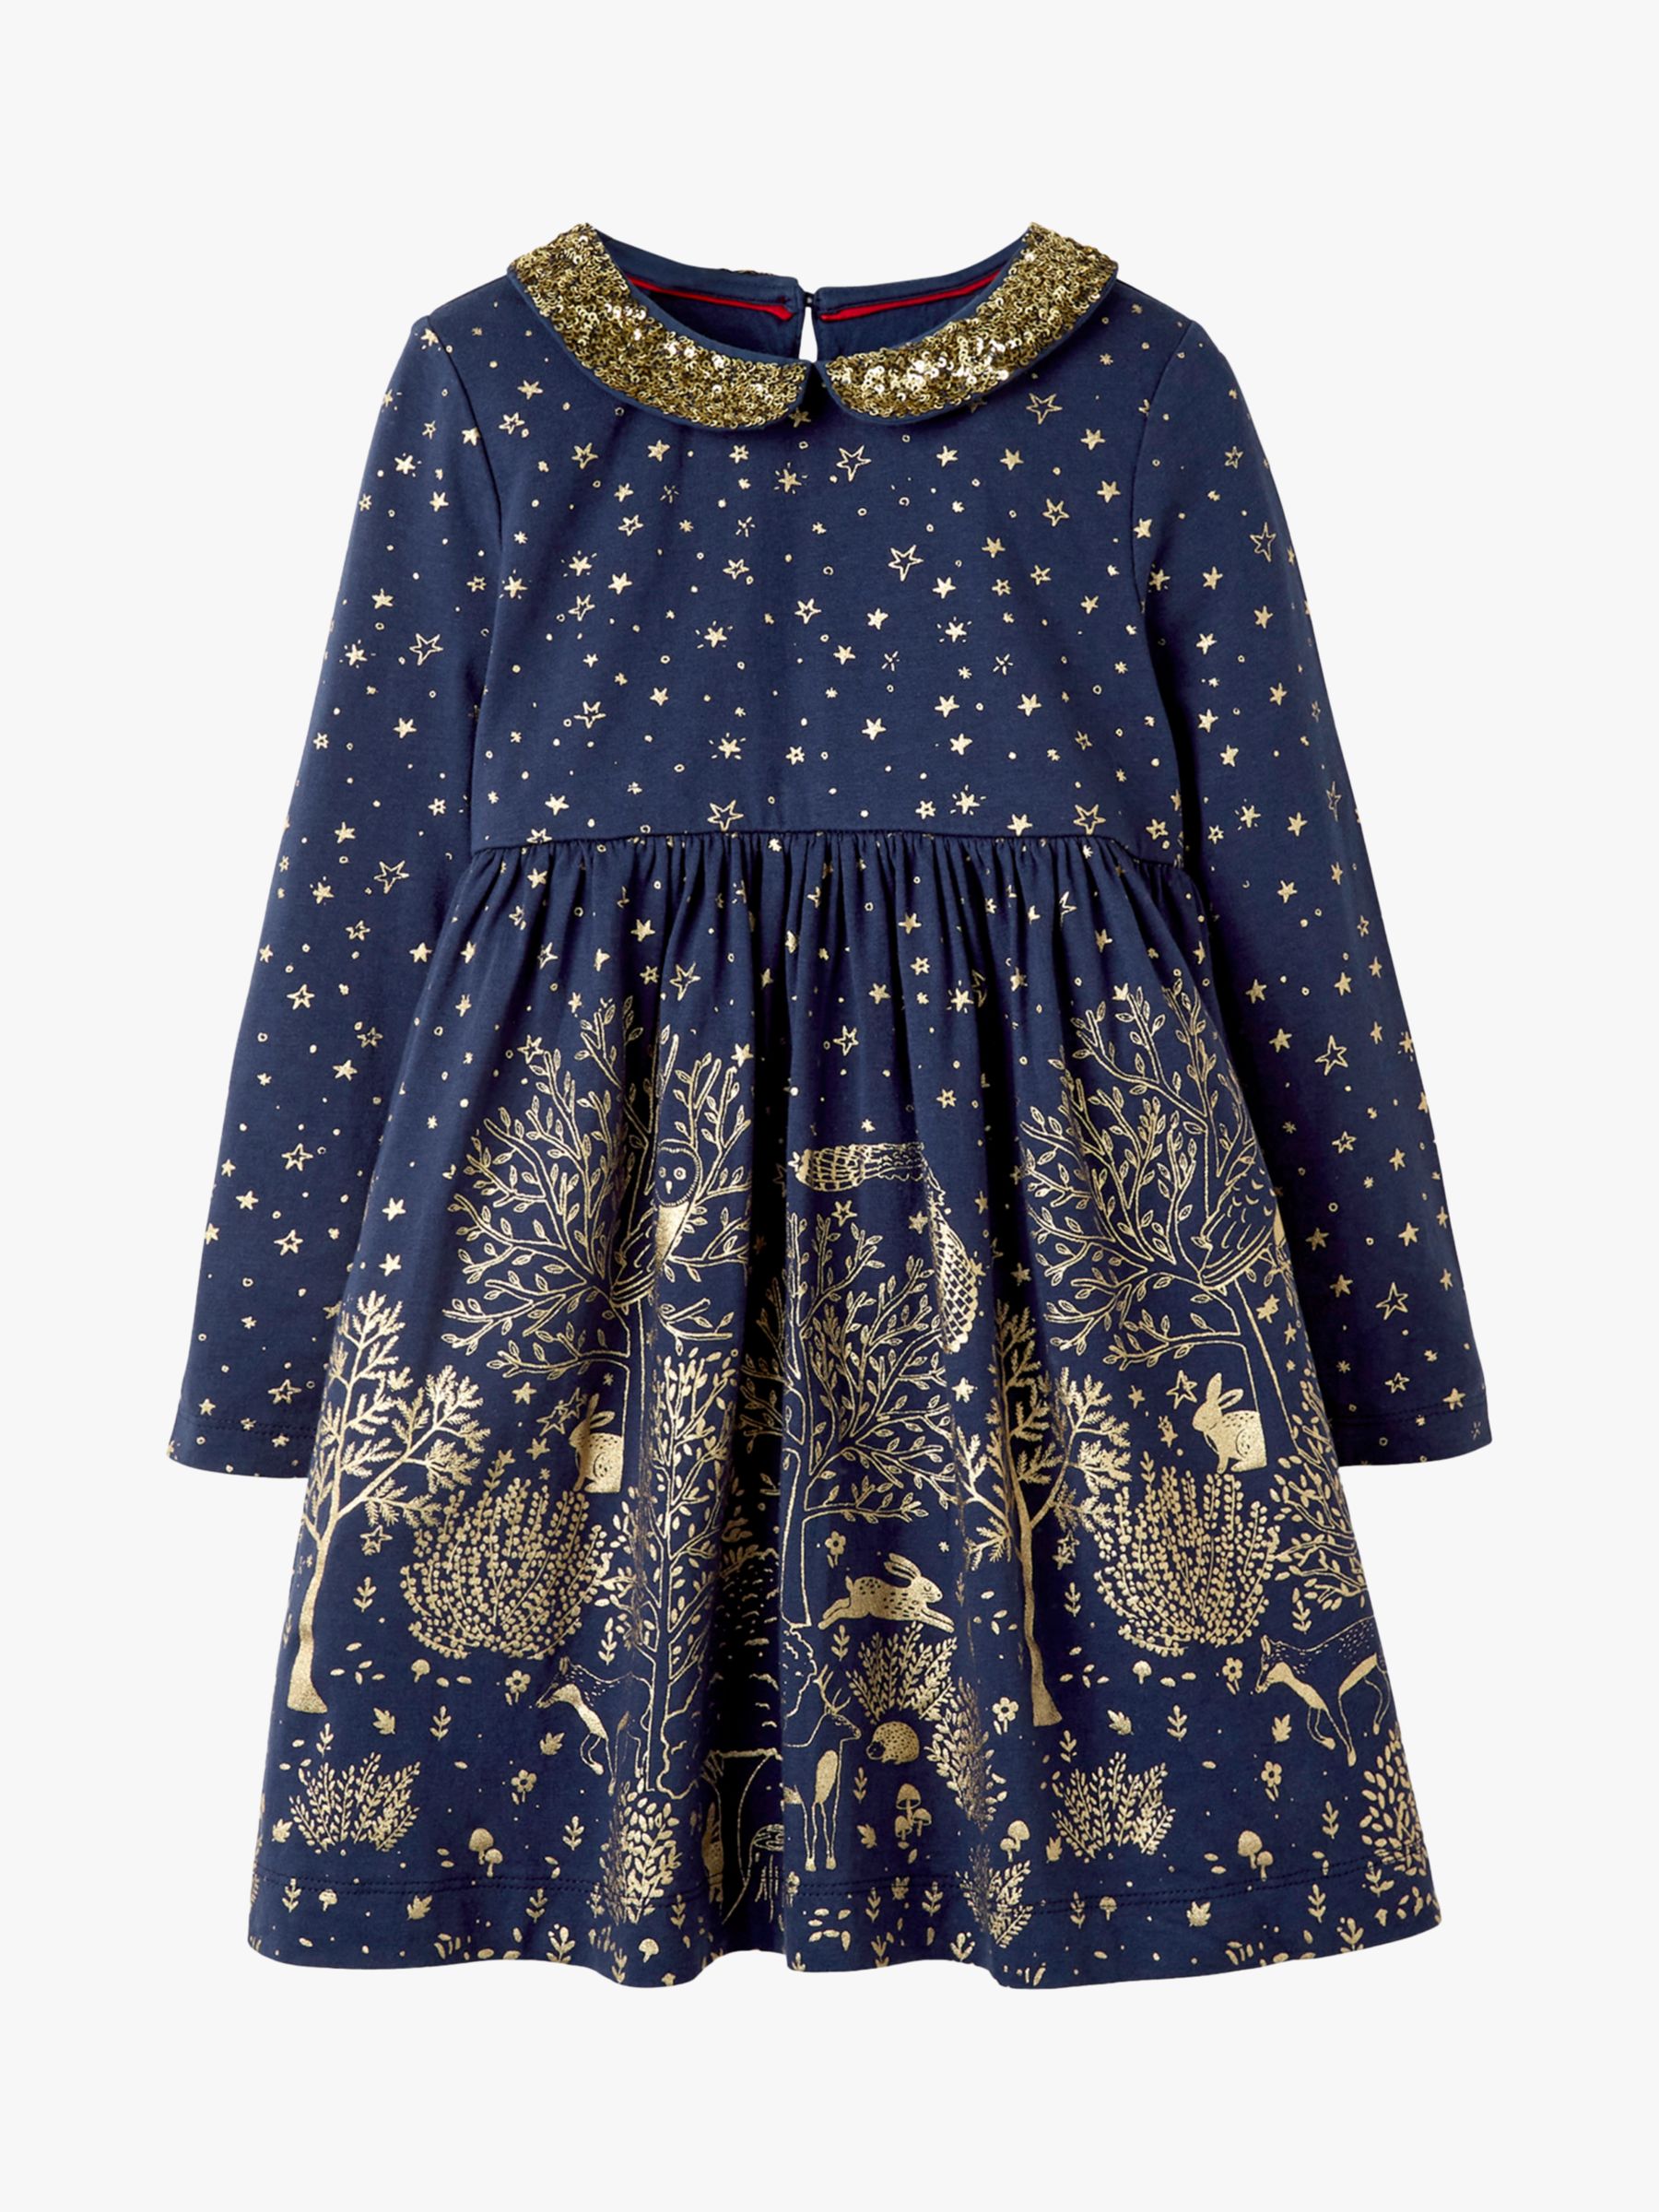 Image of Mini Boden Girls Sparkle Collar Star Party Dress NavyGold Woodland